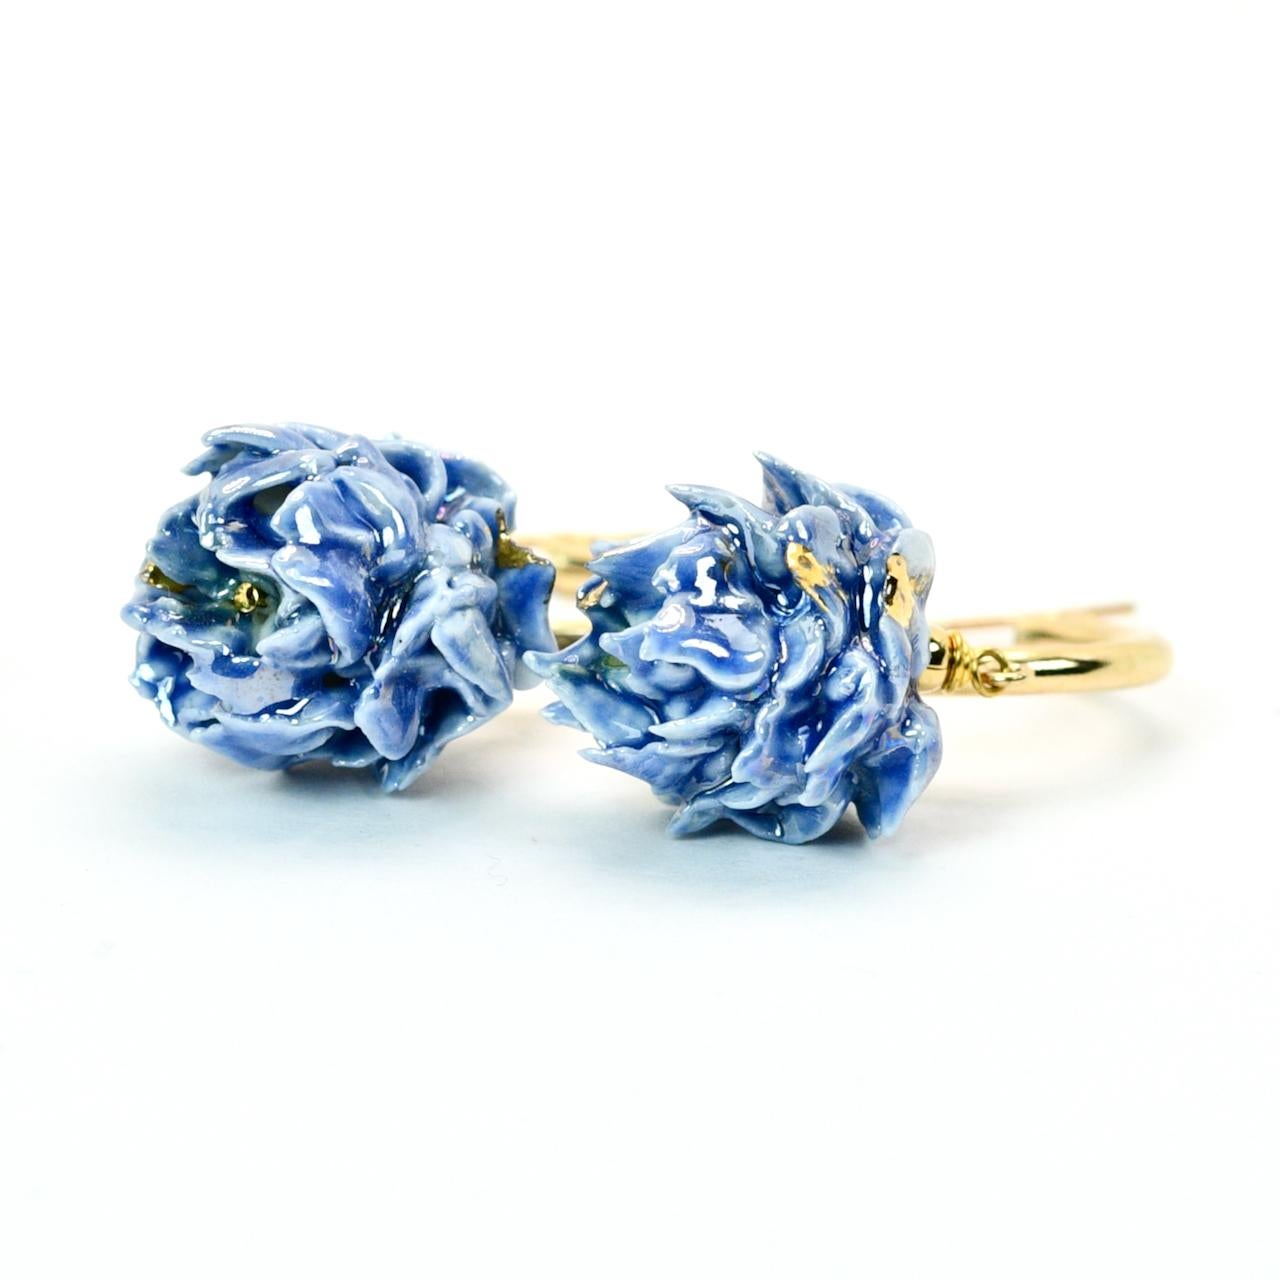 Porcelain  24K gold Mother of pearl  Handmade in London 

Add a stunning touch of nature to your look with our CAMPANA Porcelain Earrings. Their unique design resembling closed artichoke flower is elegantly finished in an eye-catching blue color,